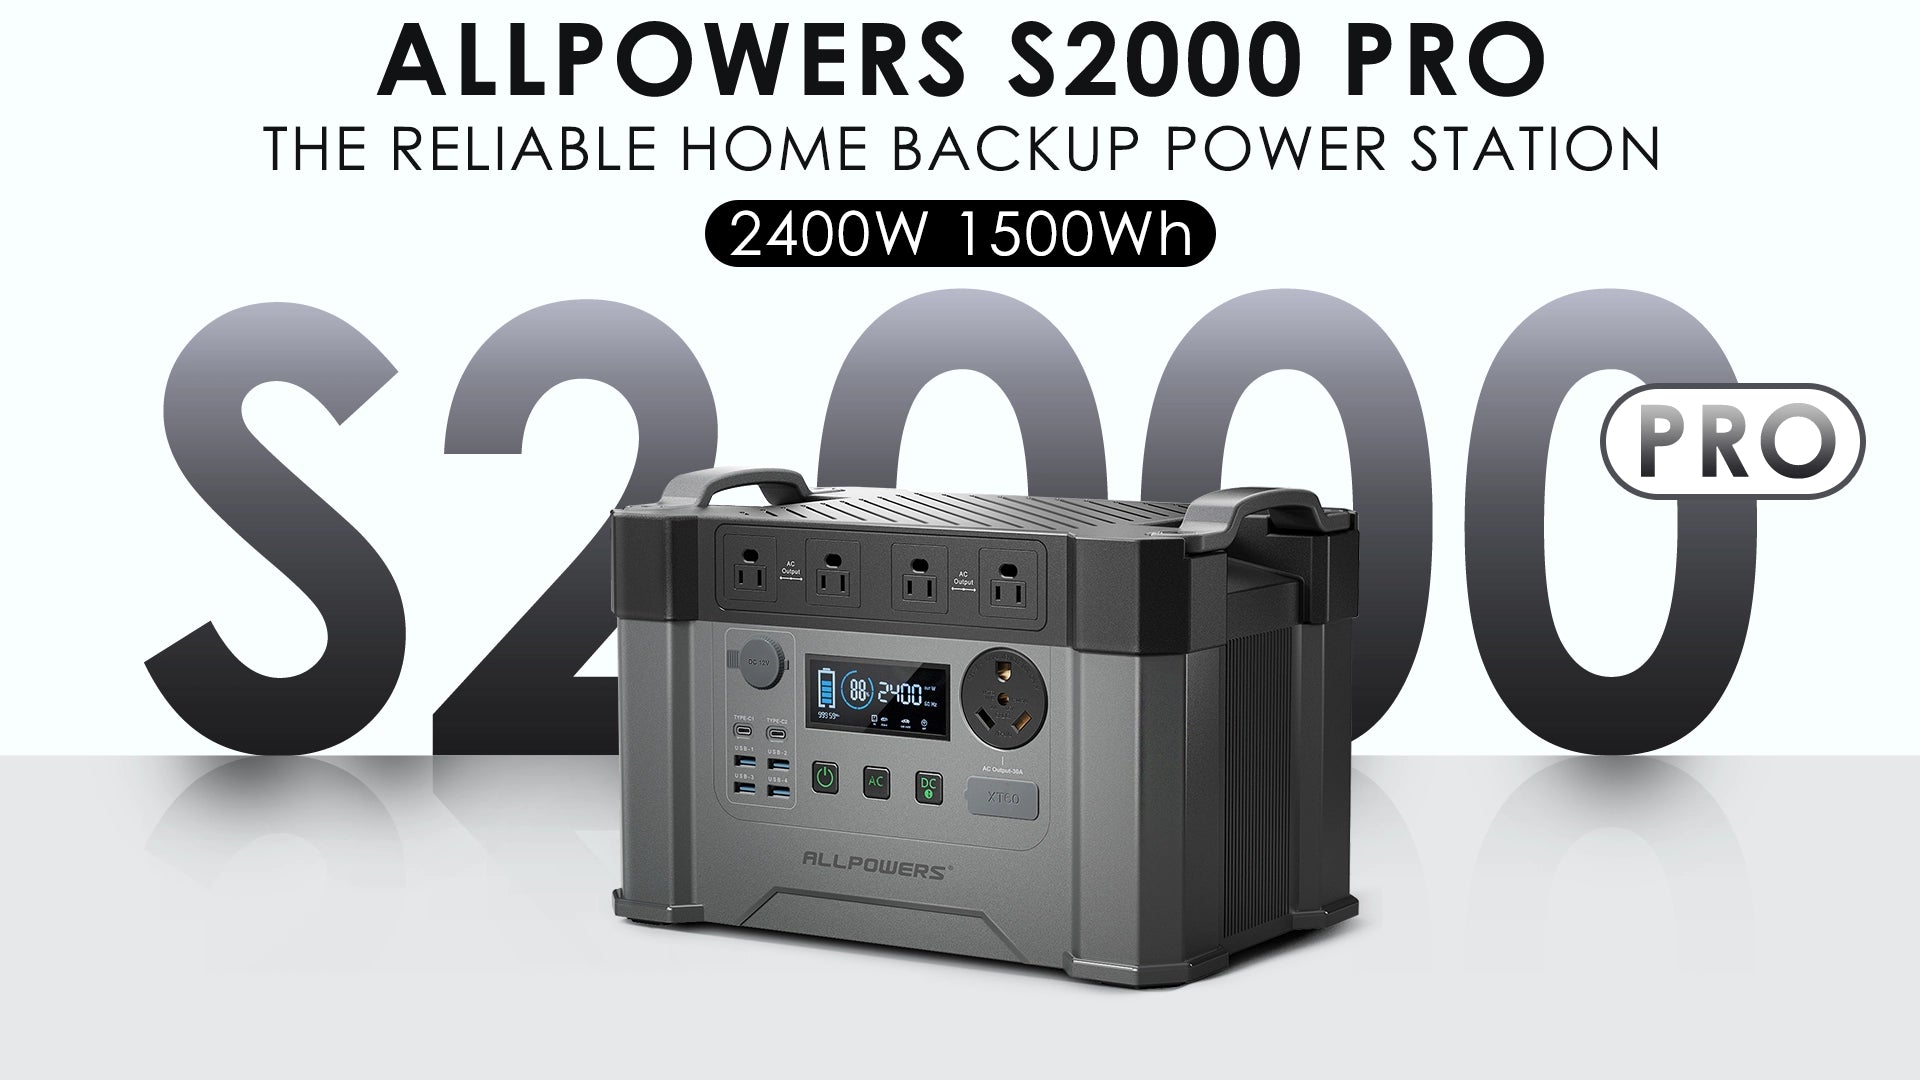 ALLPOWERS S2000 Pro Portable Power Station 2400W 1500Wh Backup Power